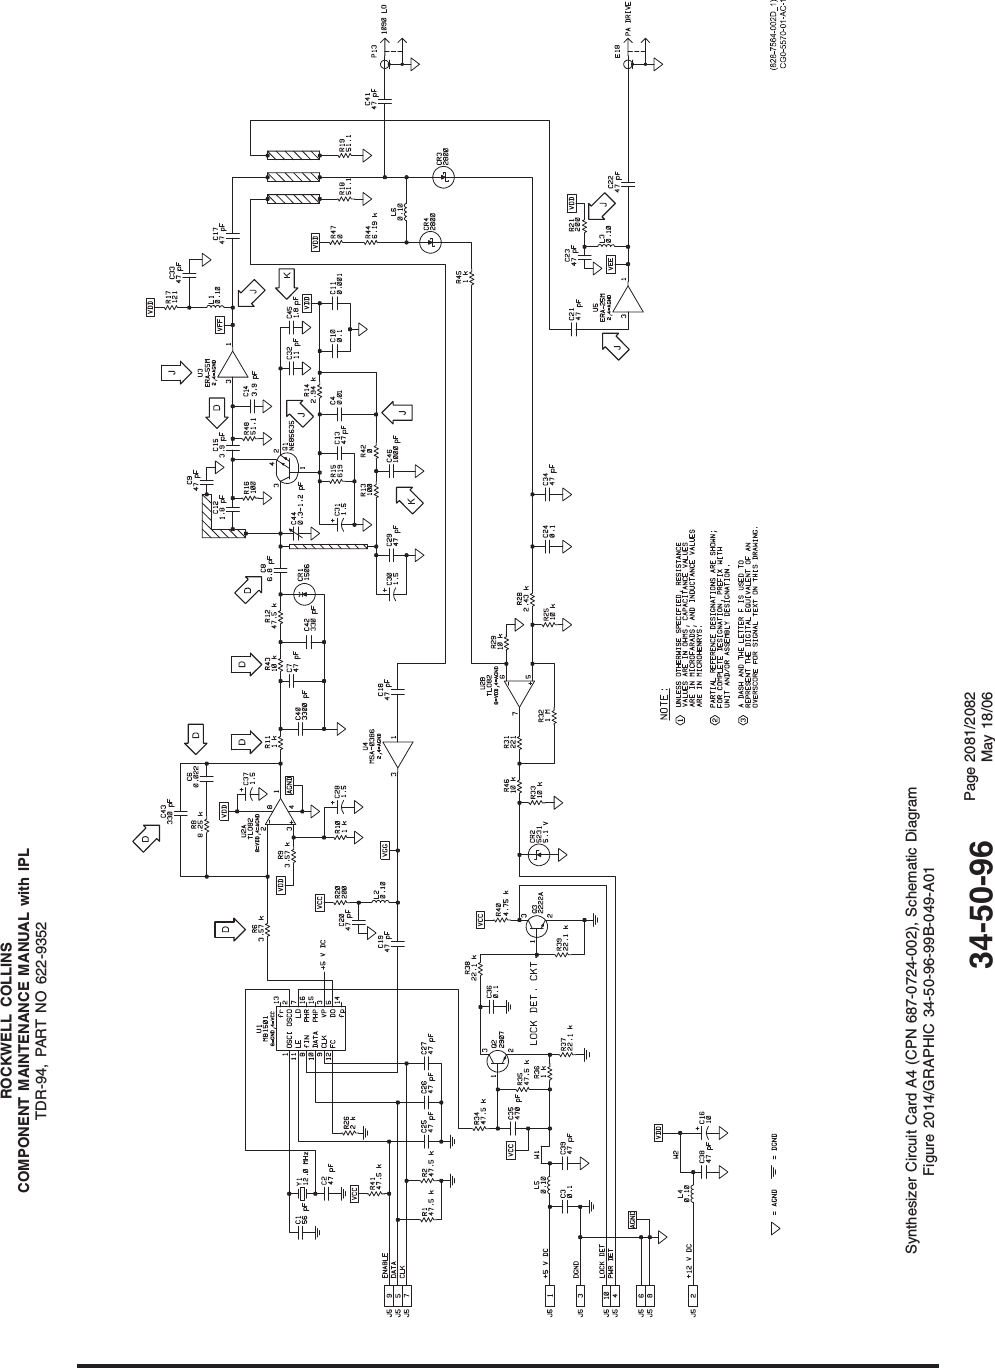 ROCKWELL COLLINSCOMPONENT MAINTENANCE MANUAL with IPLTDR-94, PART NO 622-9352Synthesizer Circuit Card A4 (CPN 687-0724-002), Schematic DiagramFigure 2014/GRAPHIC 34-50-96-99B-049-A0134-50-96 Page 2081/2082May 18/06